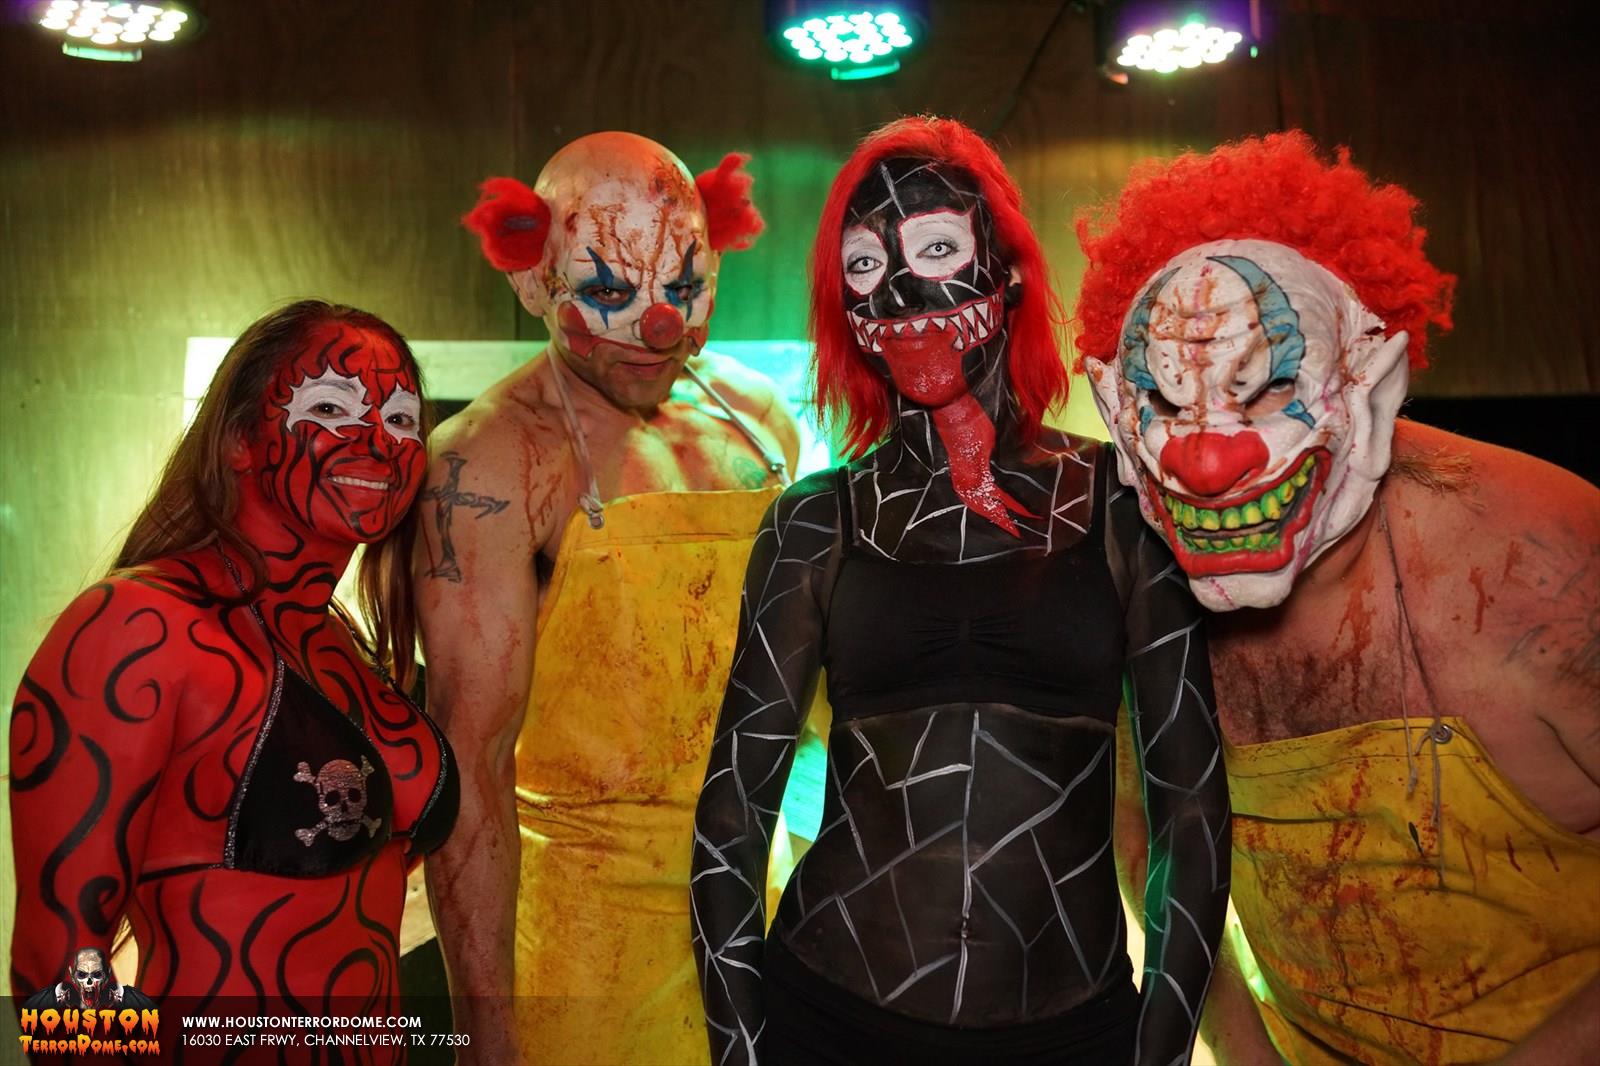 Evil clowns and zombie dancers.